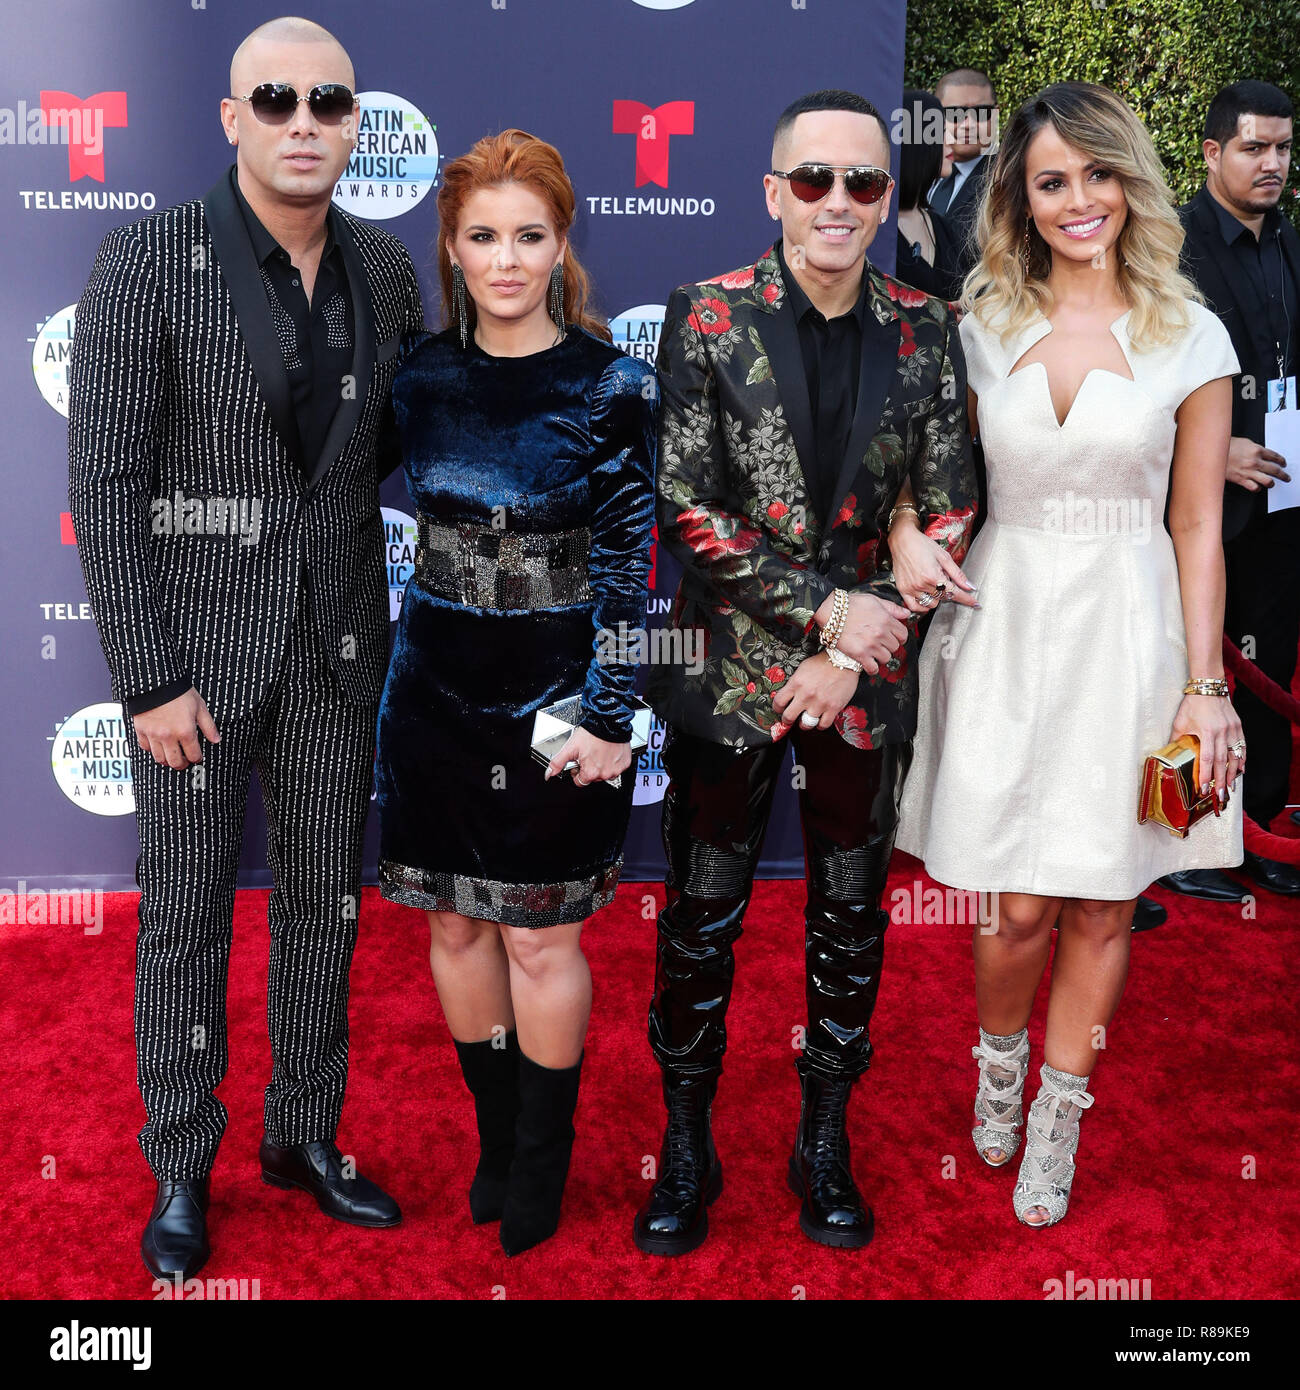 HOLLYWOOD, LOS ANGELES, CA, USA - OCTOBER 25: Yomaira Ortiz Feliciano, Wisin, Yandel, Edneris Espada Figueroa, Wisin Y Yandel at the 2018 Latin American Music Awards held at the Dolby Theatre on October 25, 2018 in Hollywood, Los Angeles, California, United States. (Photo by Xavier Collin/Image Press Agency) Stock Photo